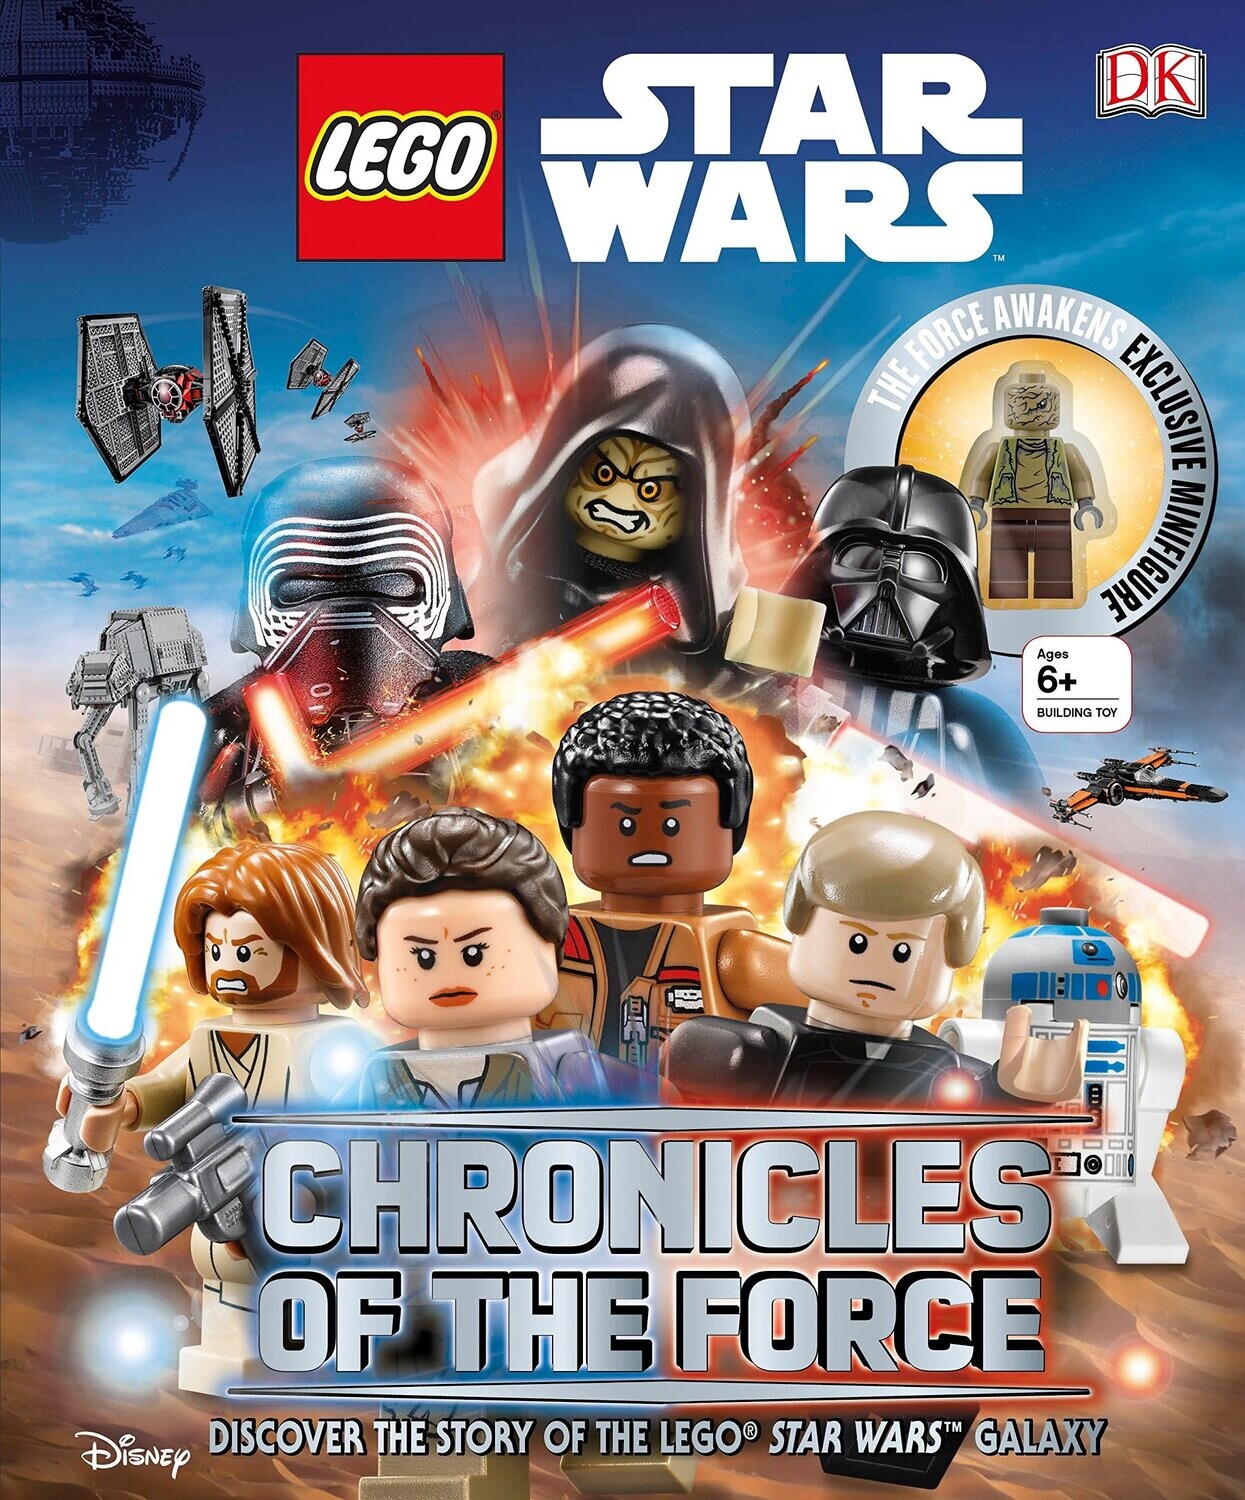 Star Wars Chronicles of the Force Book